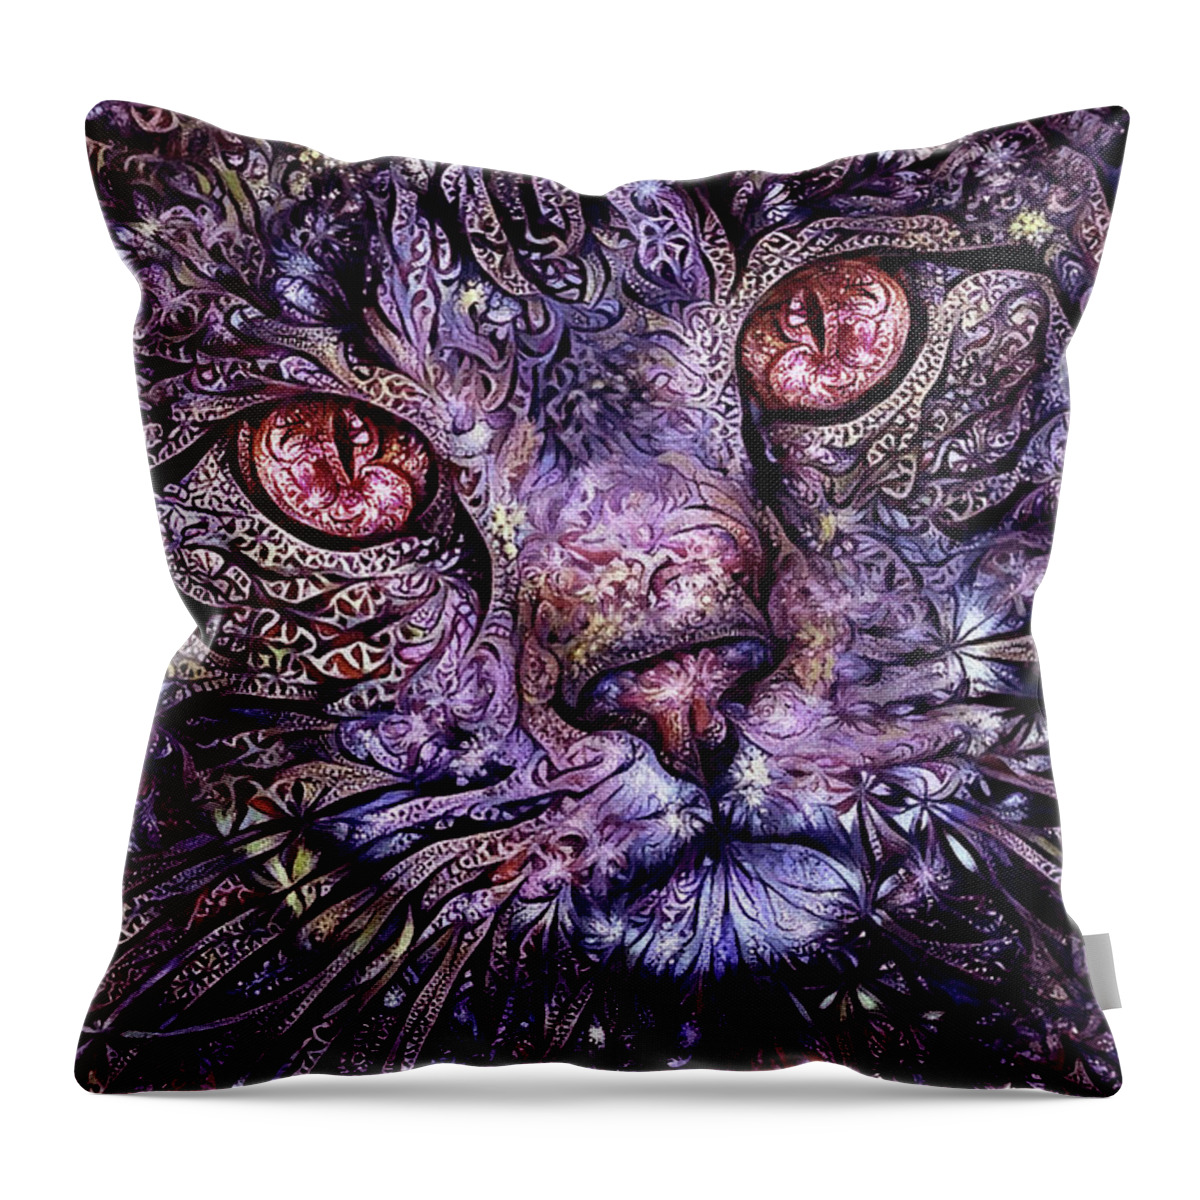 Tabby Cat Throw Pillow featuring the digital art Purple Tabby Cat by Peggy Collins